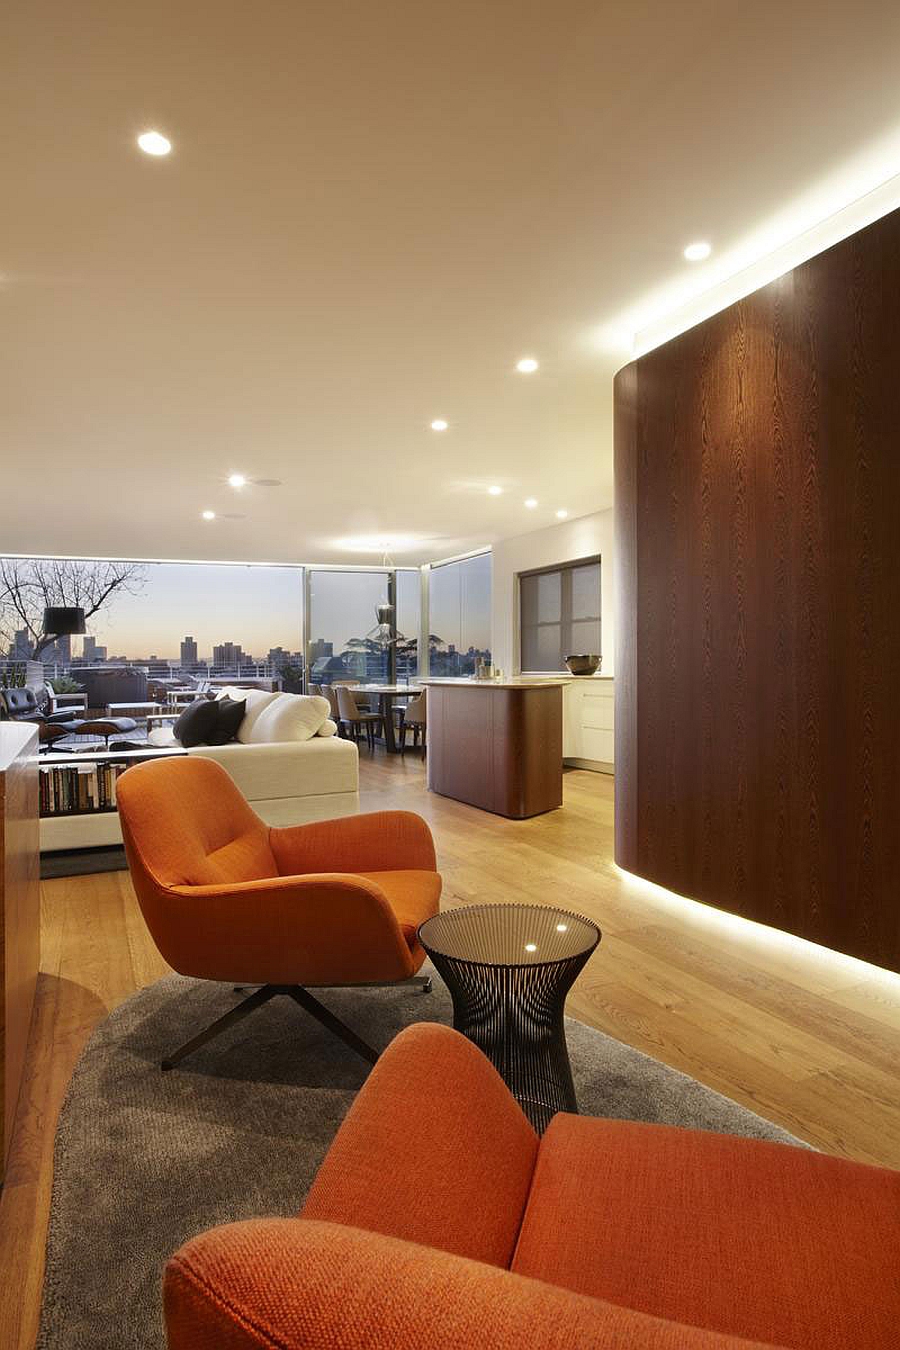 Lovely orange chairs add color to the sydney apartment